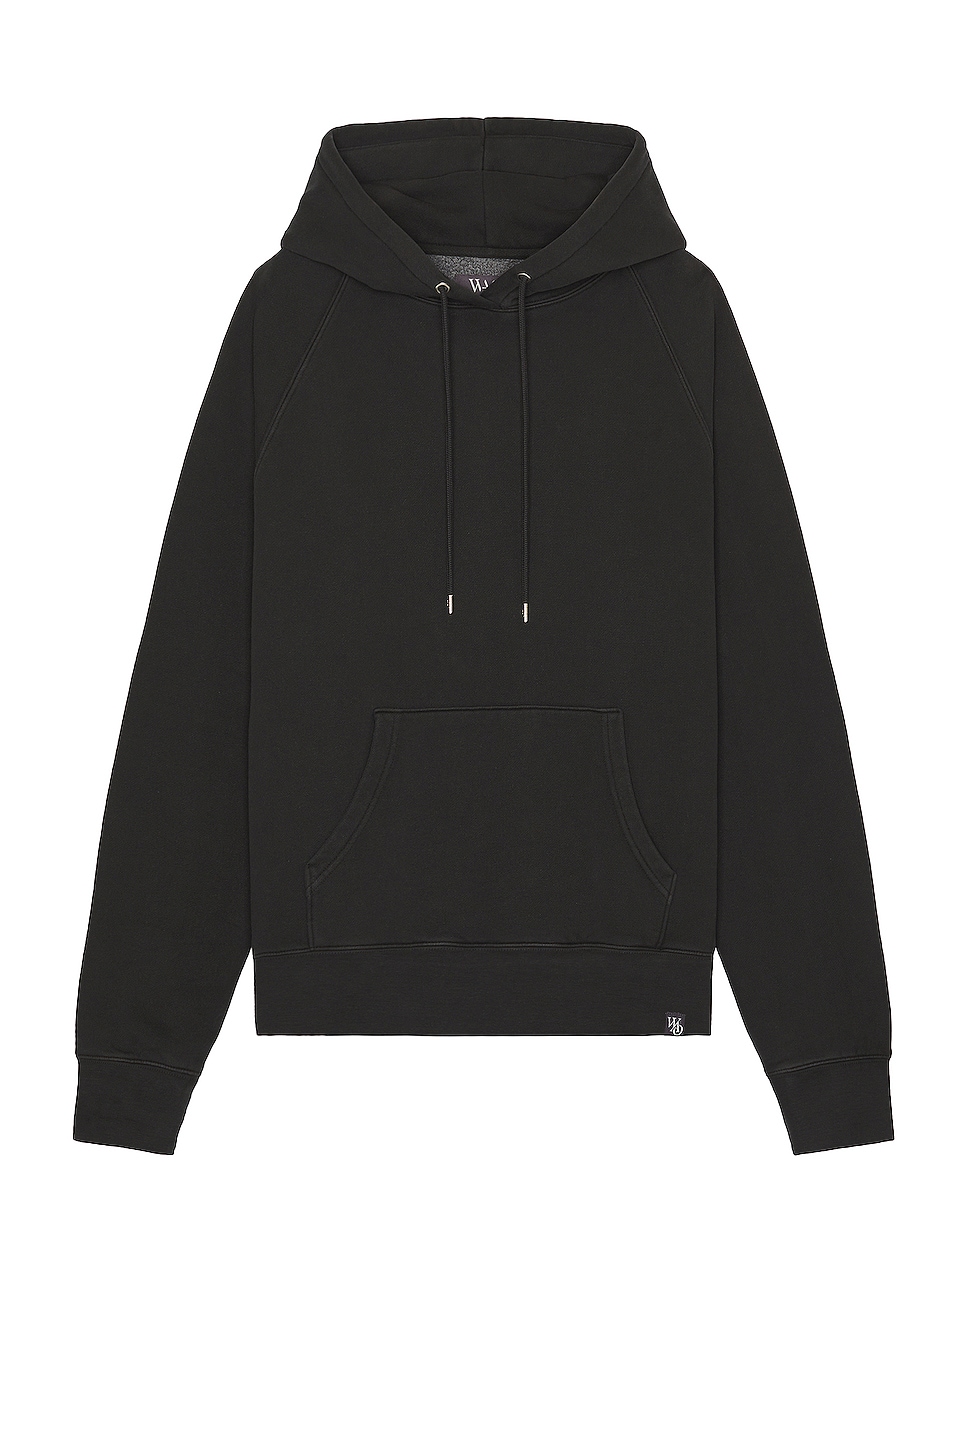 Image 1 of WAO The Pullover Hoodie in black